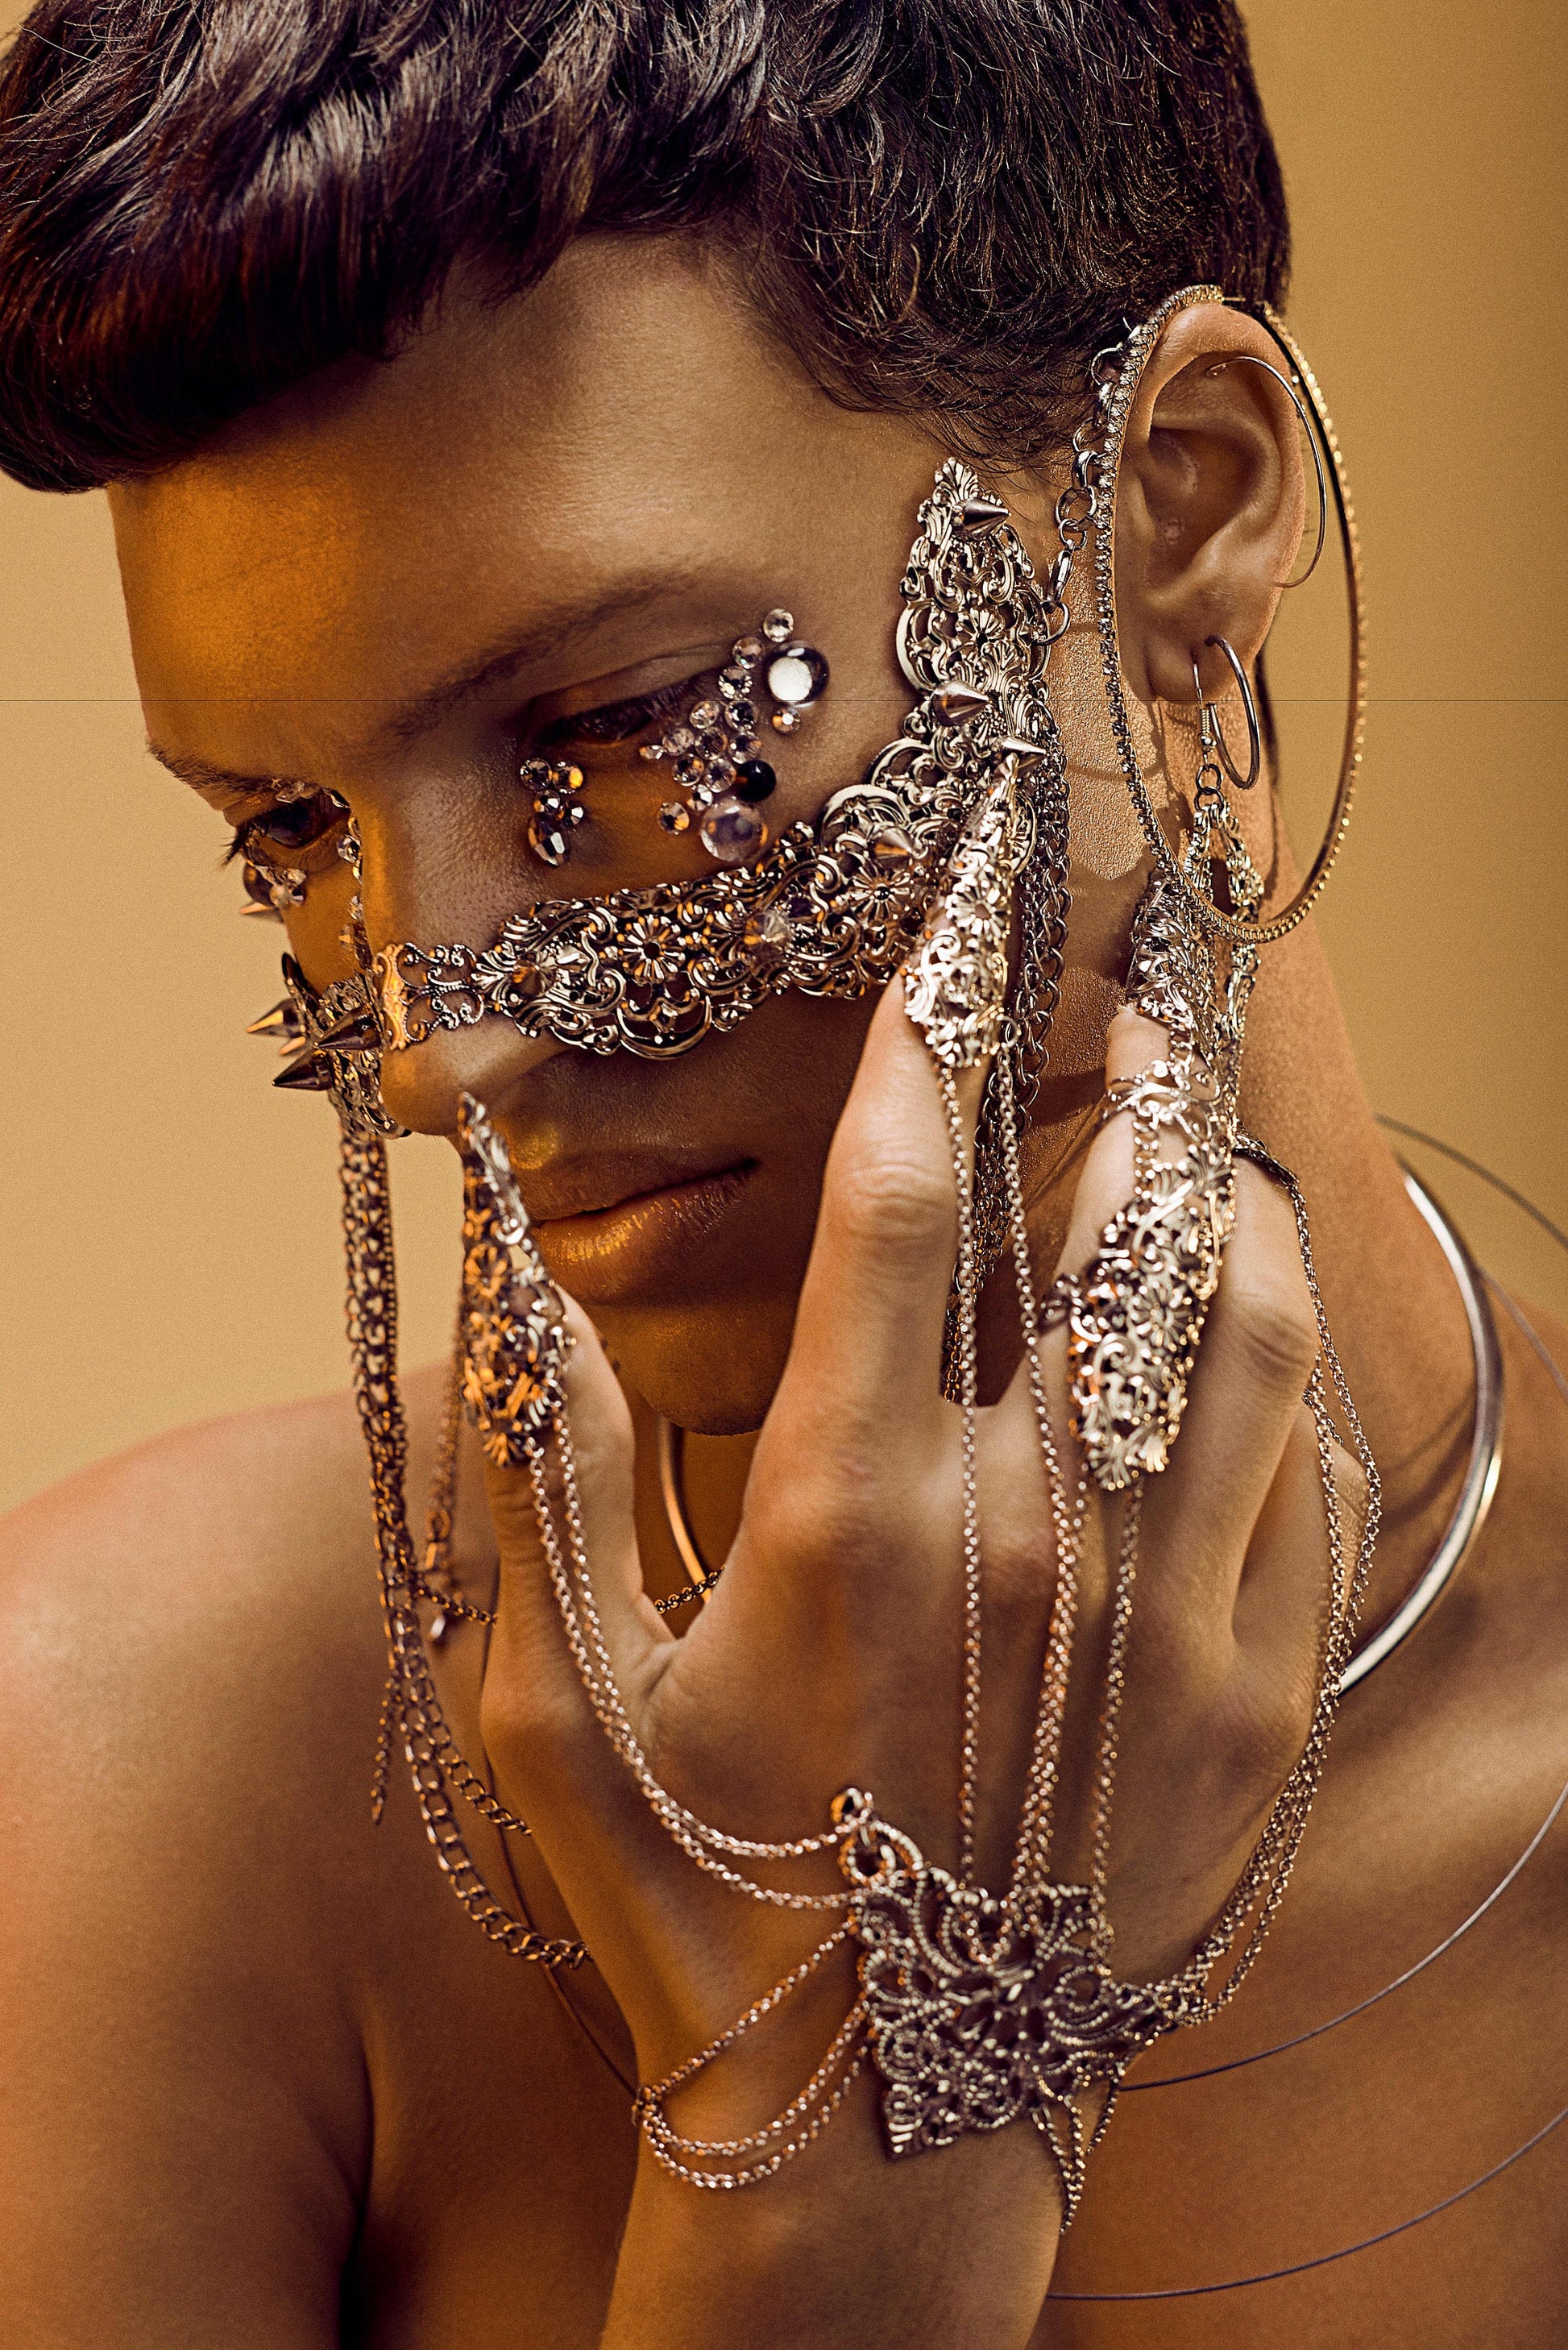 A model presents a neo-gothic vision with Myril Jewels, featuring a studded nose chain mask and a hand chain bracelet with claws. The ensemble embodies a dark avant-garde aesthetic, perfect for those seeking gothic-chic jewelry to express a unique, bold style at any event.